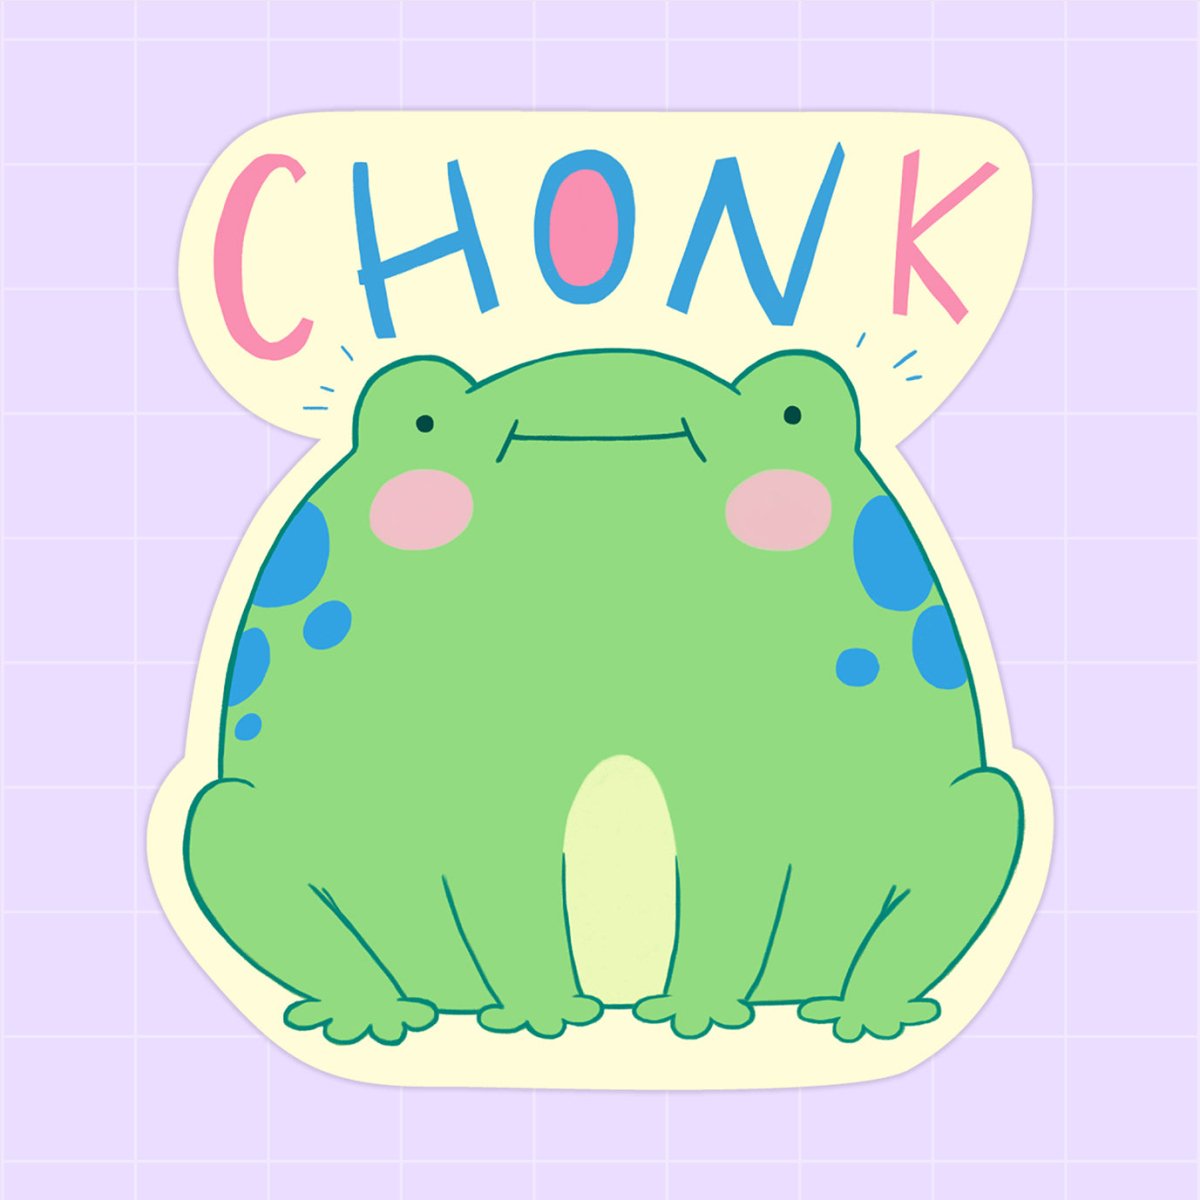 Man i love frogs, chonky frog, frog art, stickers for planner, cute stationery shop, company stationery